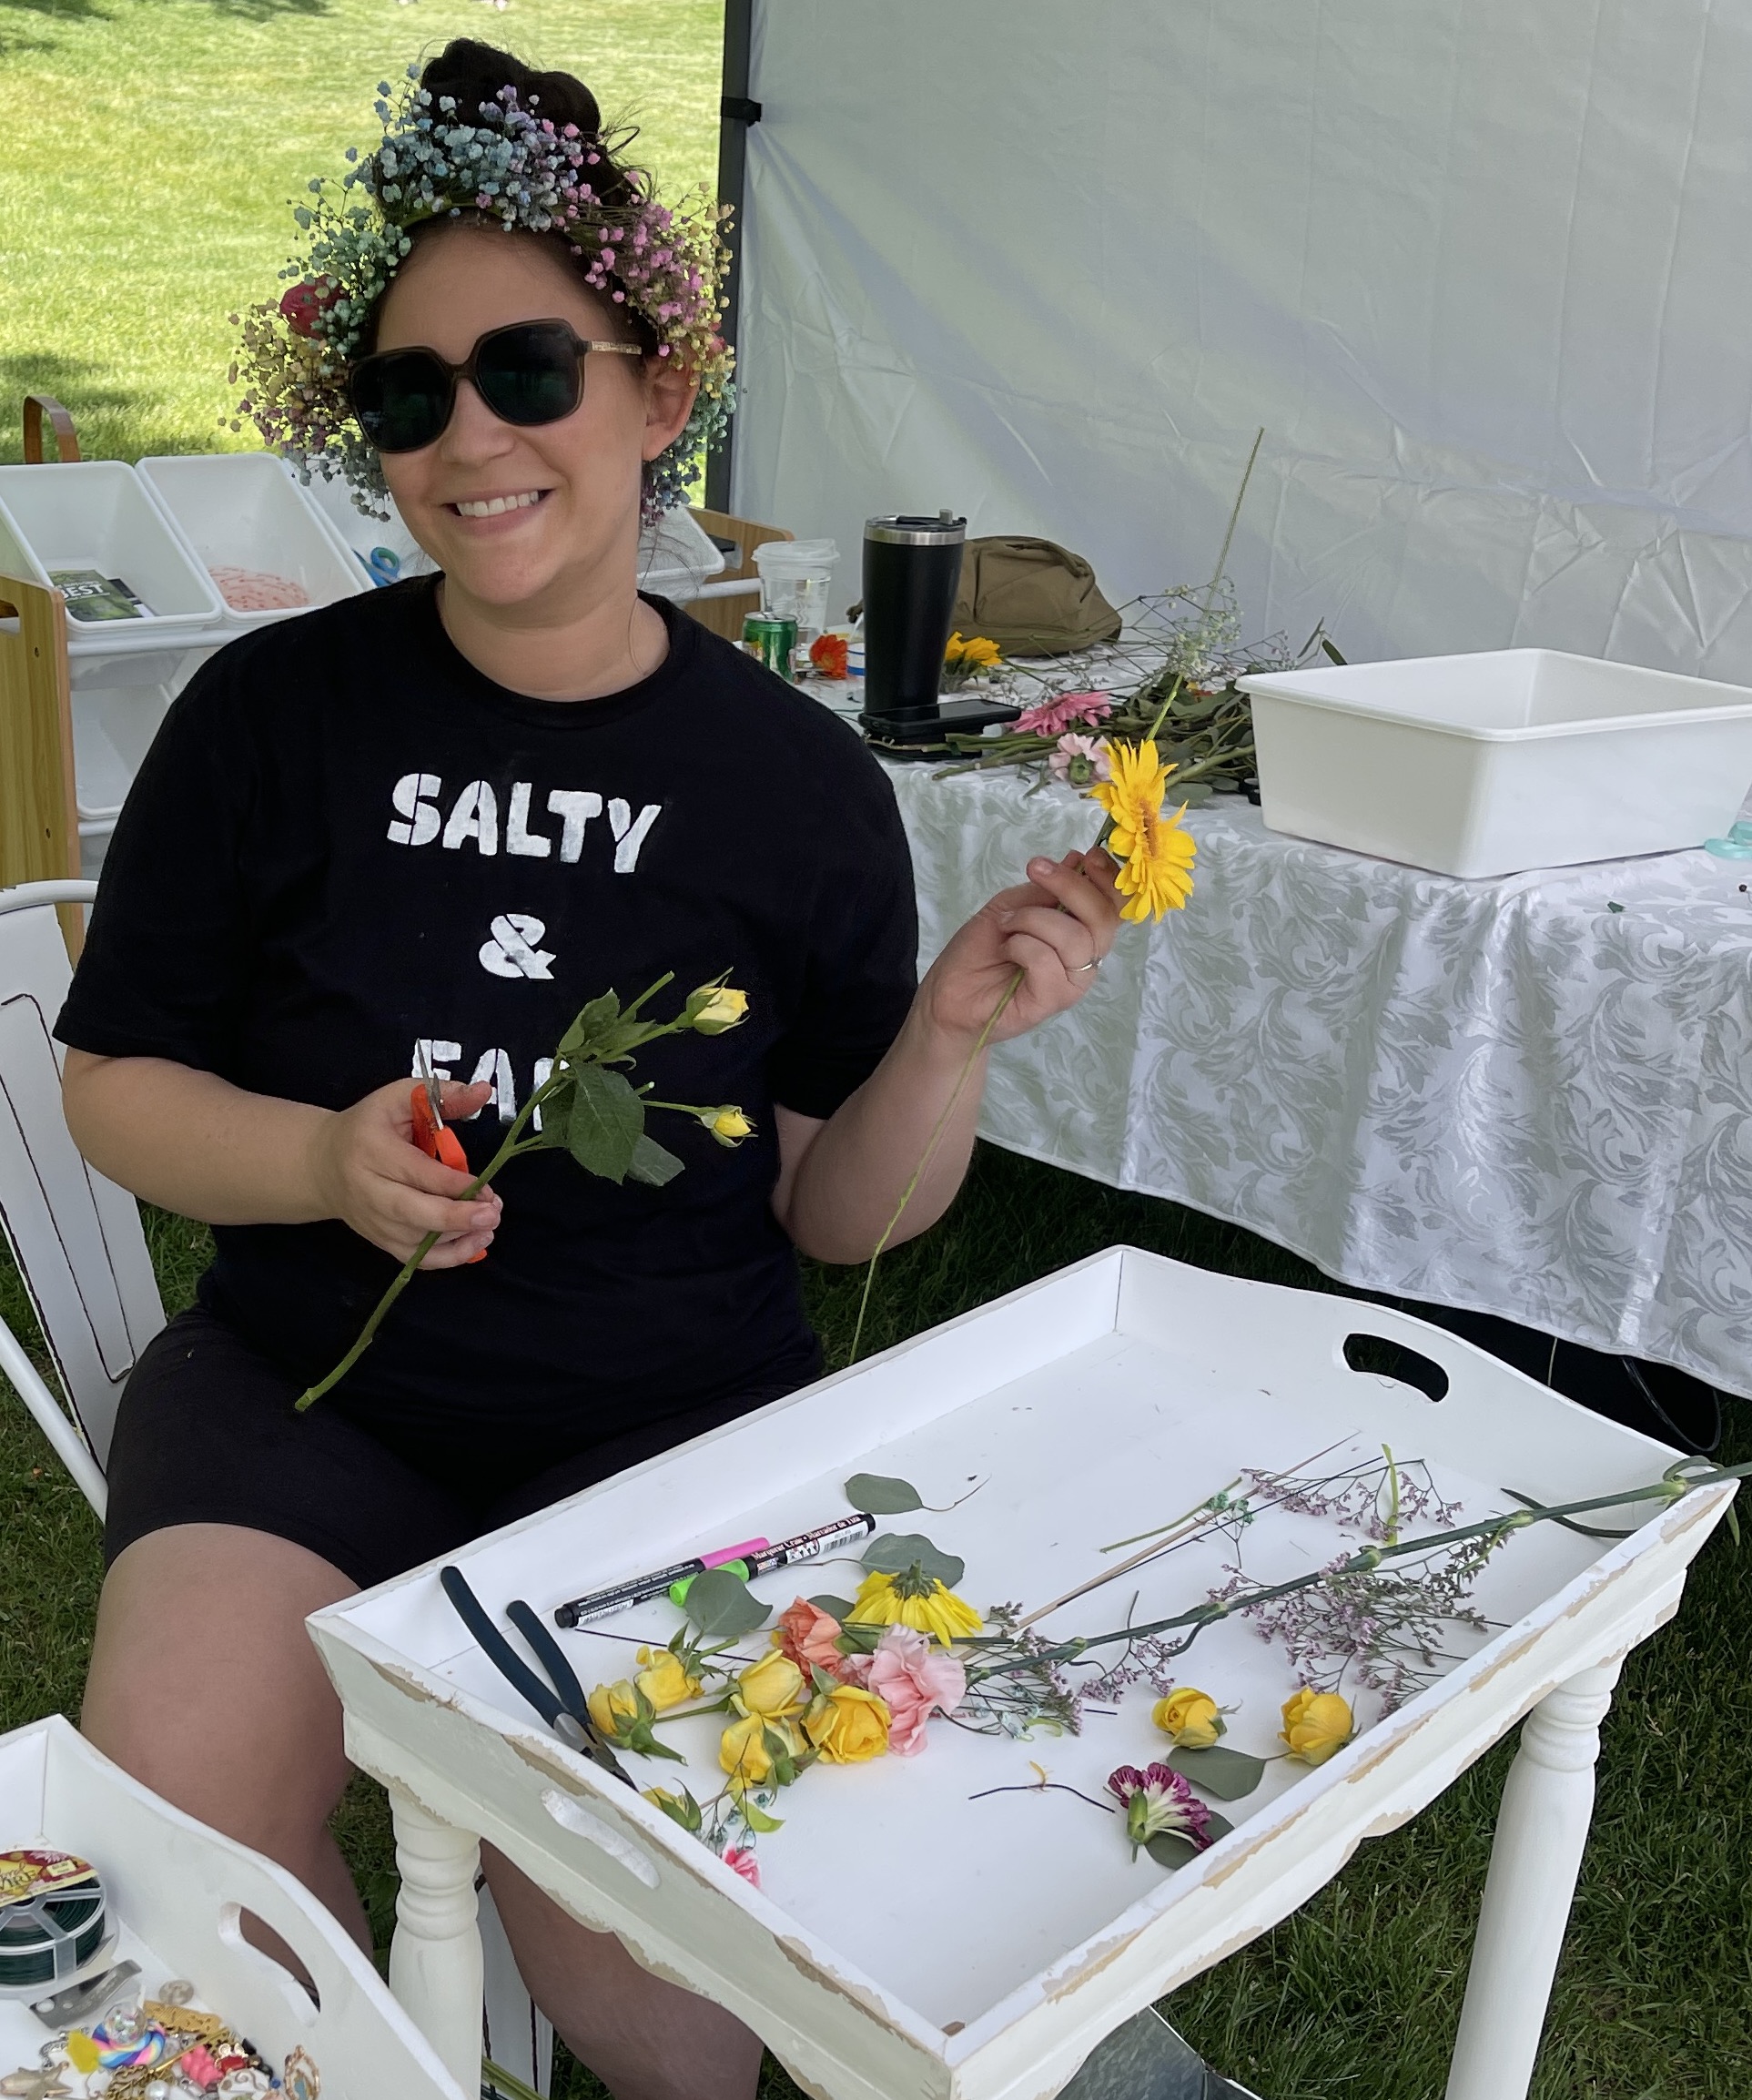 Salty and Fae artist hand makes floral crowns.